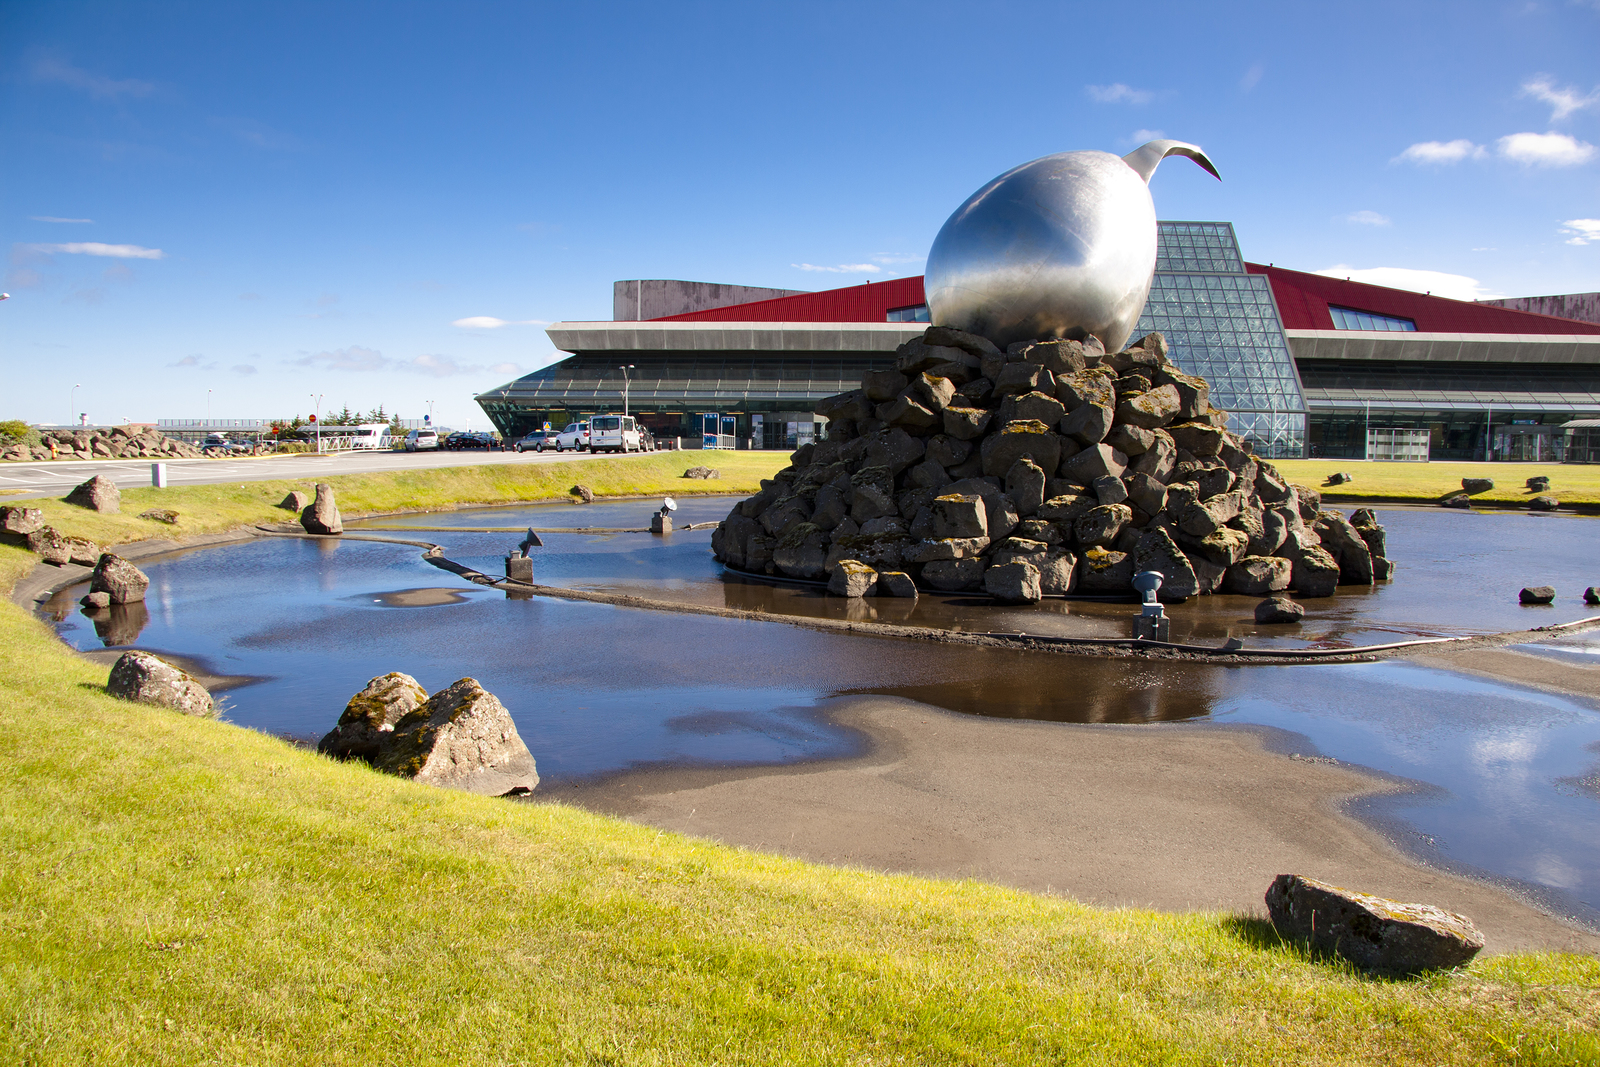 A serene outdoor sculpture of a bird perched on a sphere, set amidst a reflective pool with rocks, with an airport building in the background under a clear blue sky